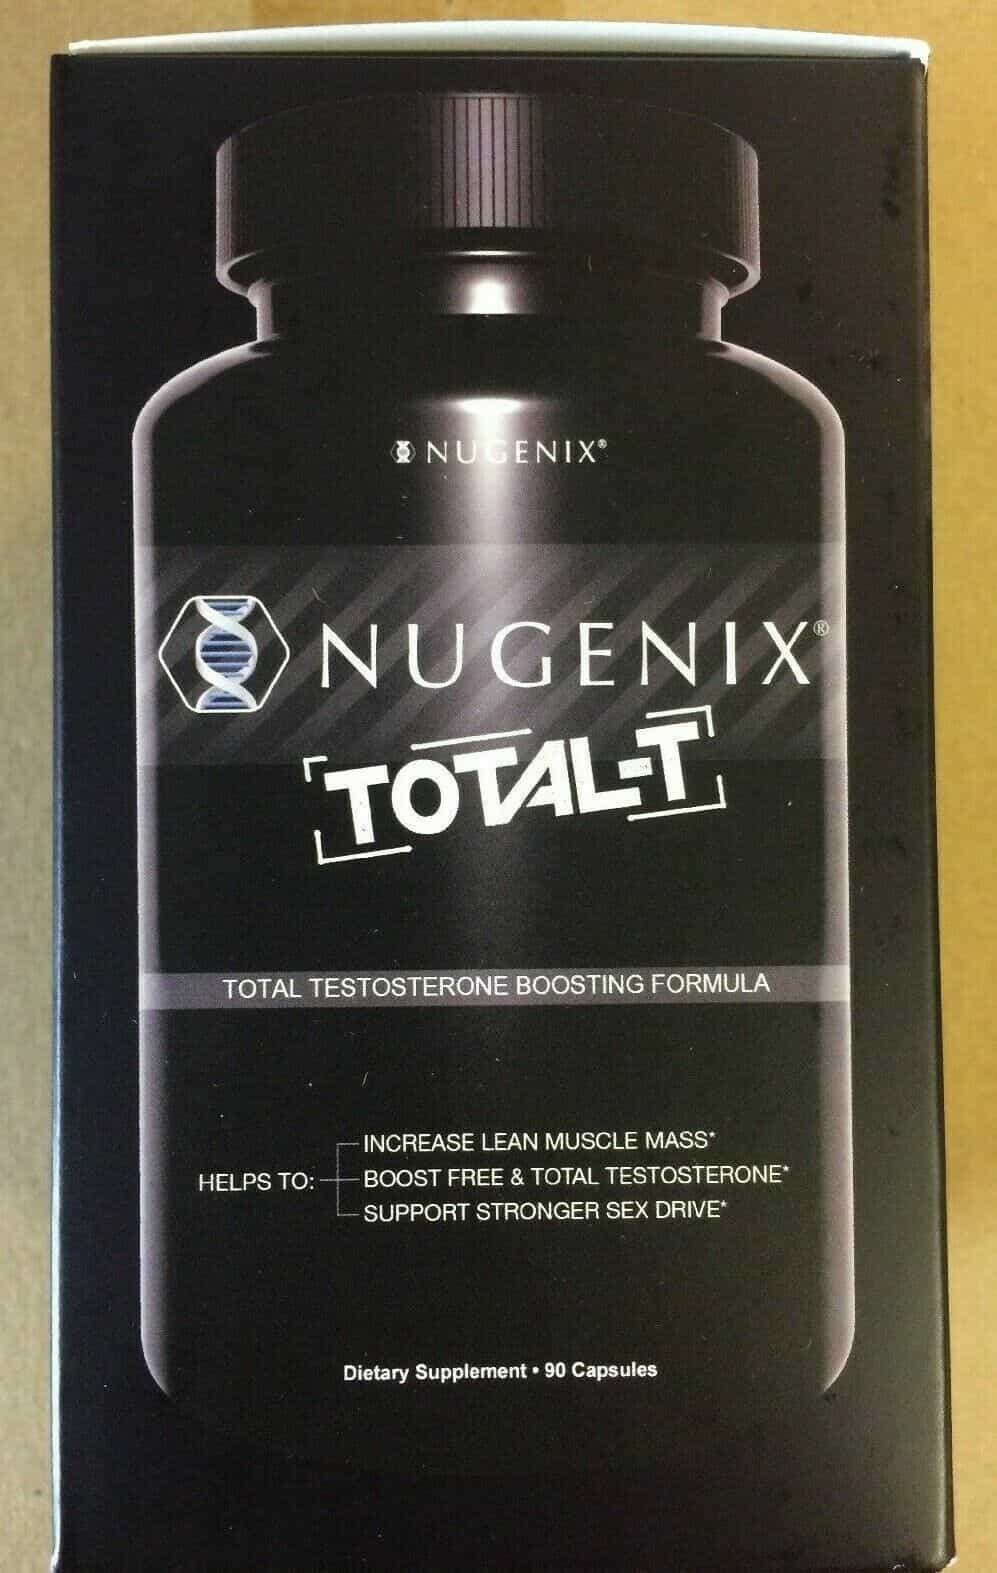 2X Nugenix Total T 90 Caps Increase Lean Muscle Mass Free Shipping  FRESH DATES